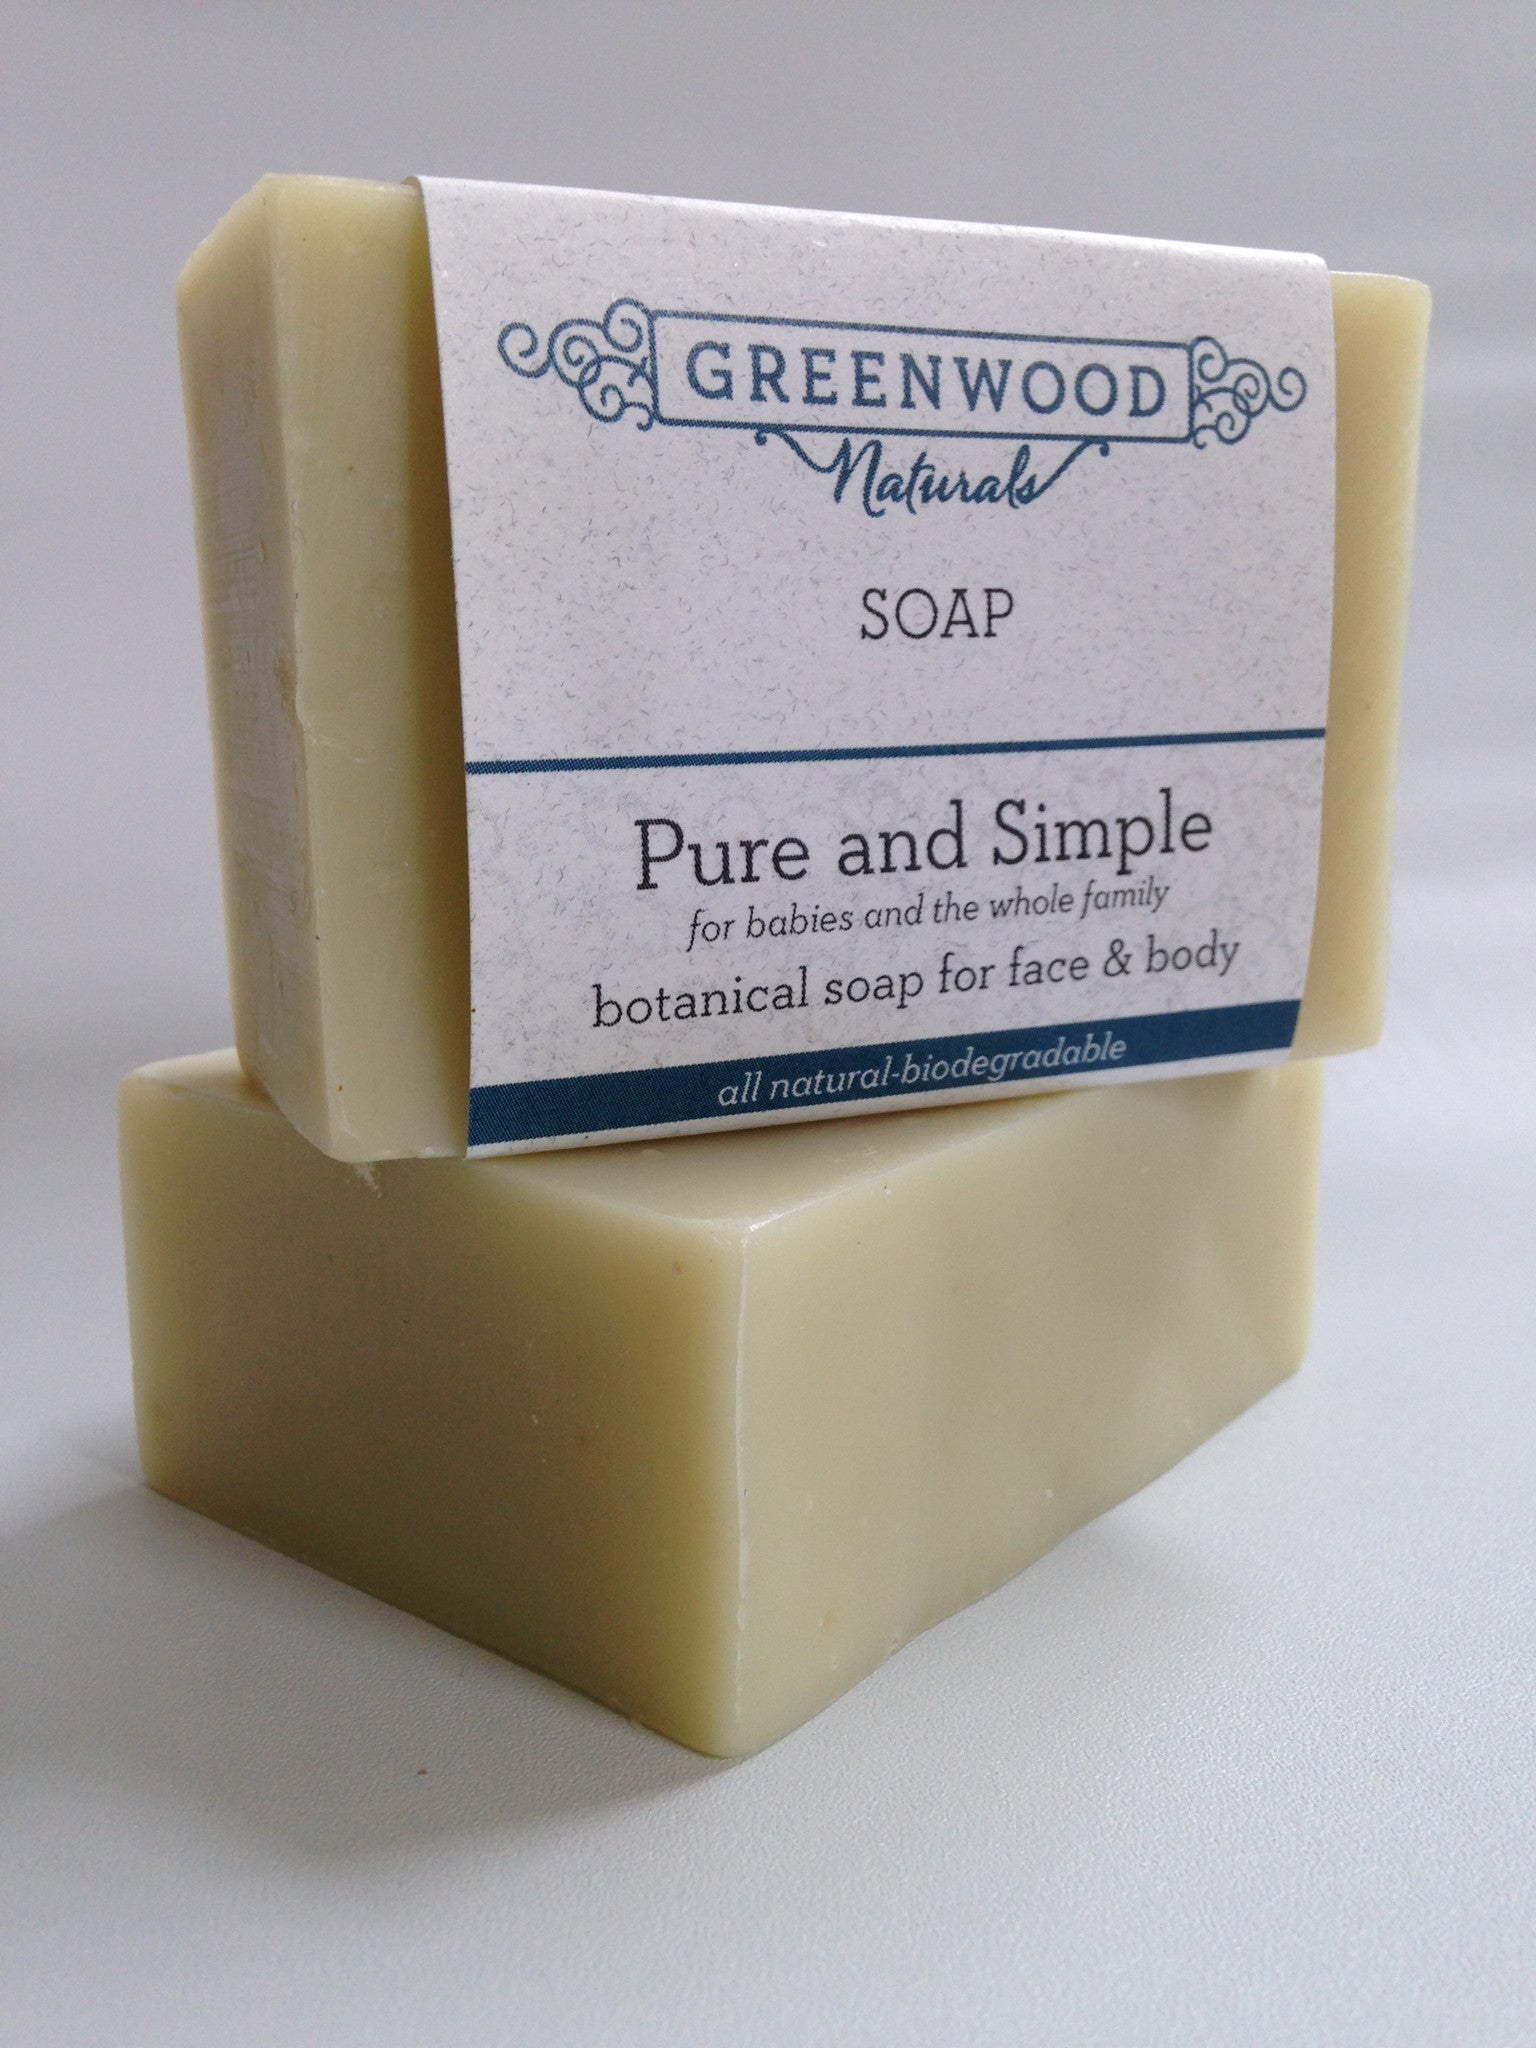 Pure and Simple Natural Soap - Greenwood Naturals